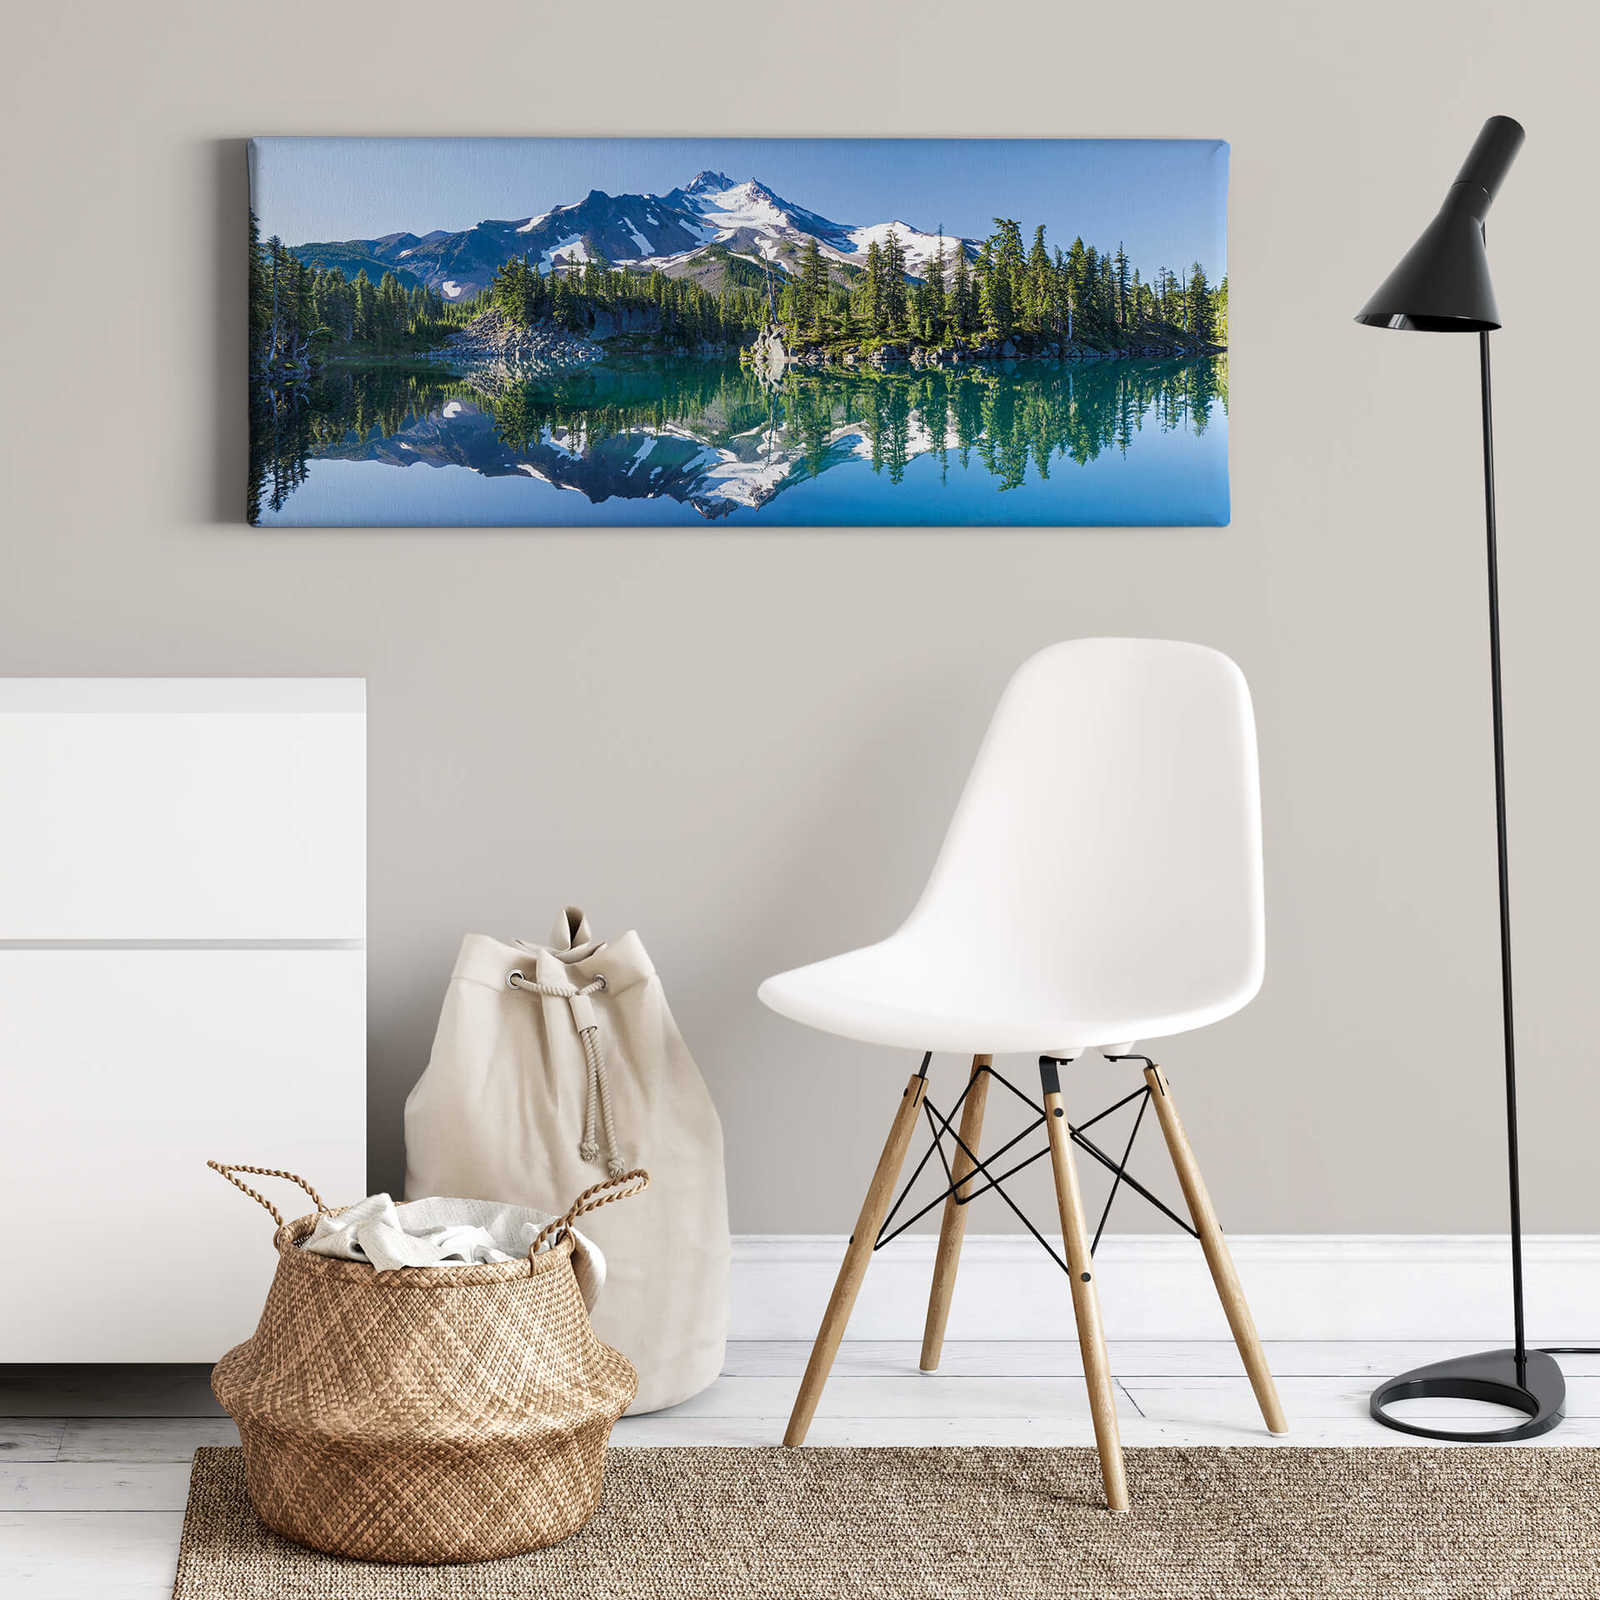             Canvas print of a mountain landscape – blue, green
        